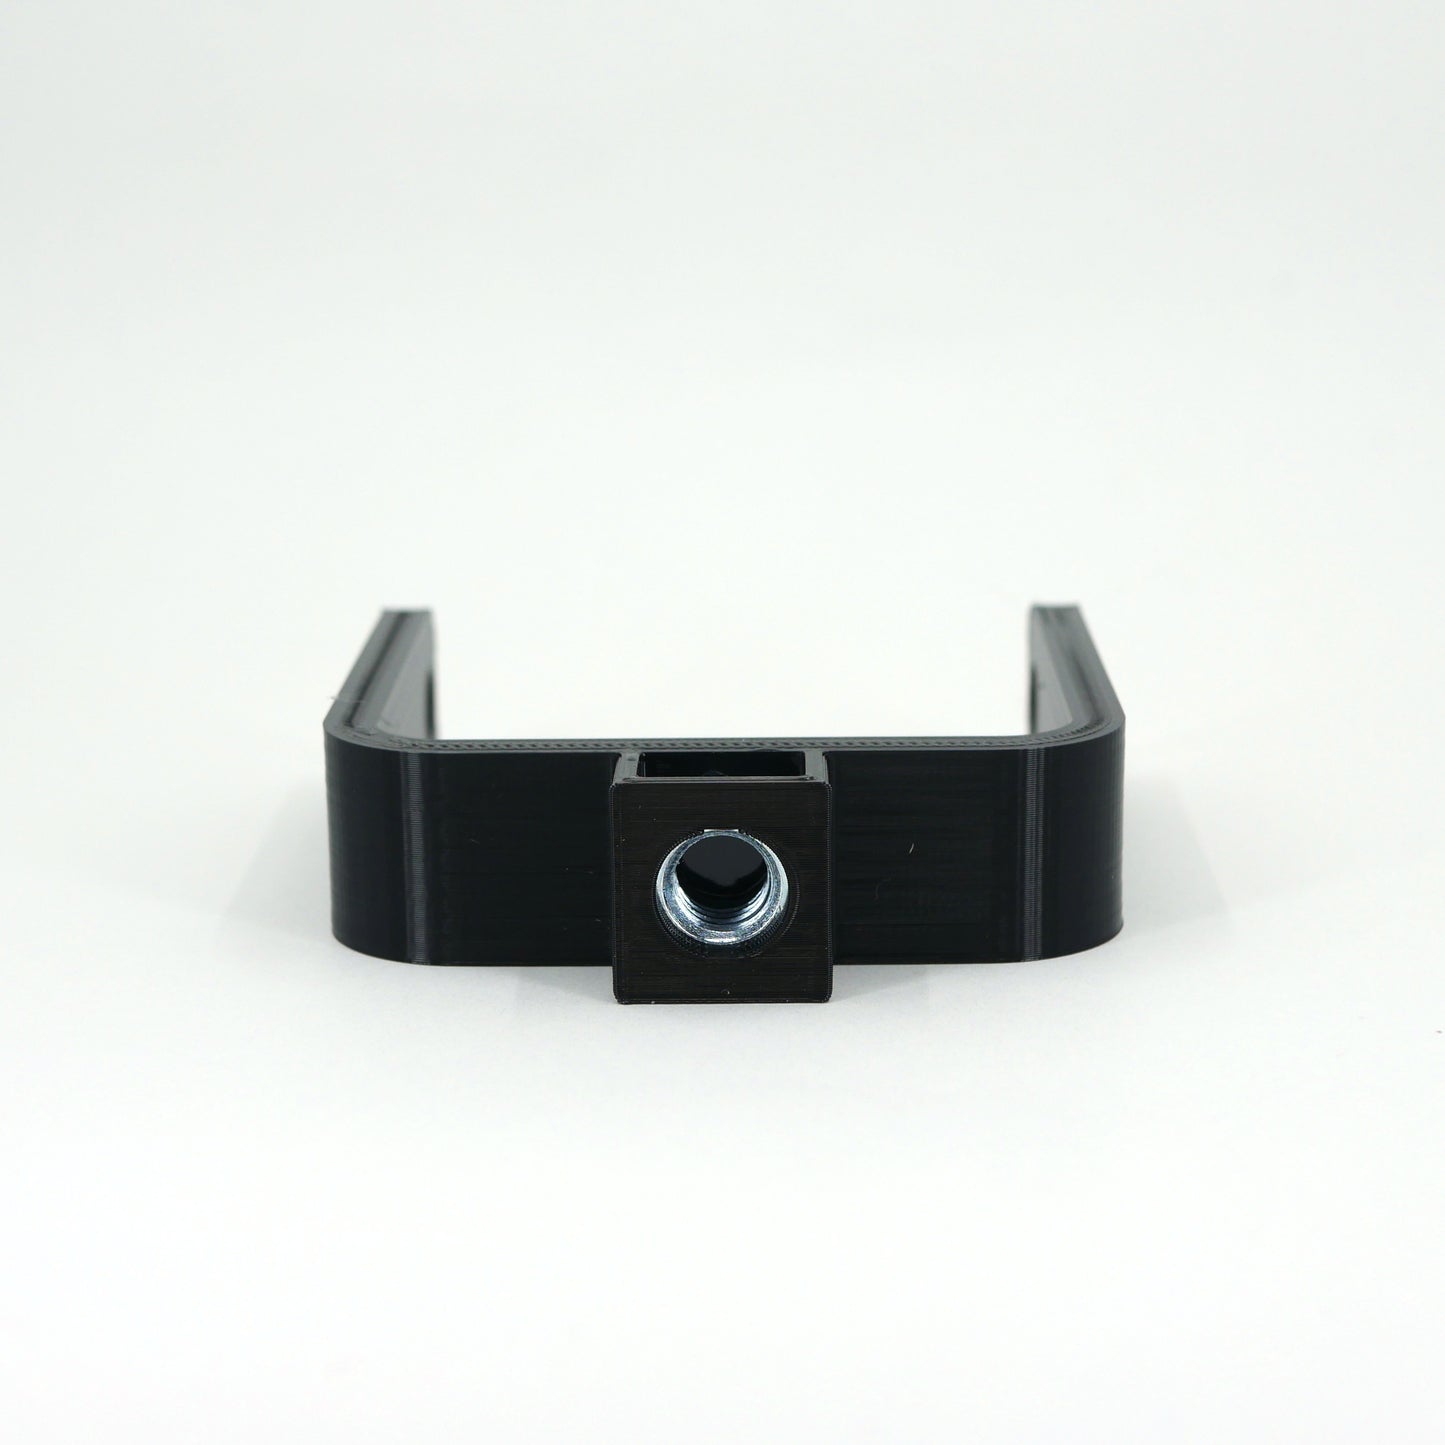 The back of a black microphone mount for the Elgato Wave microphone.